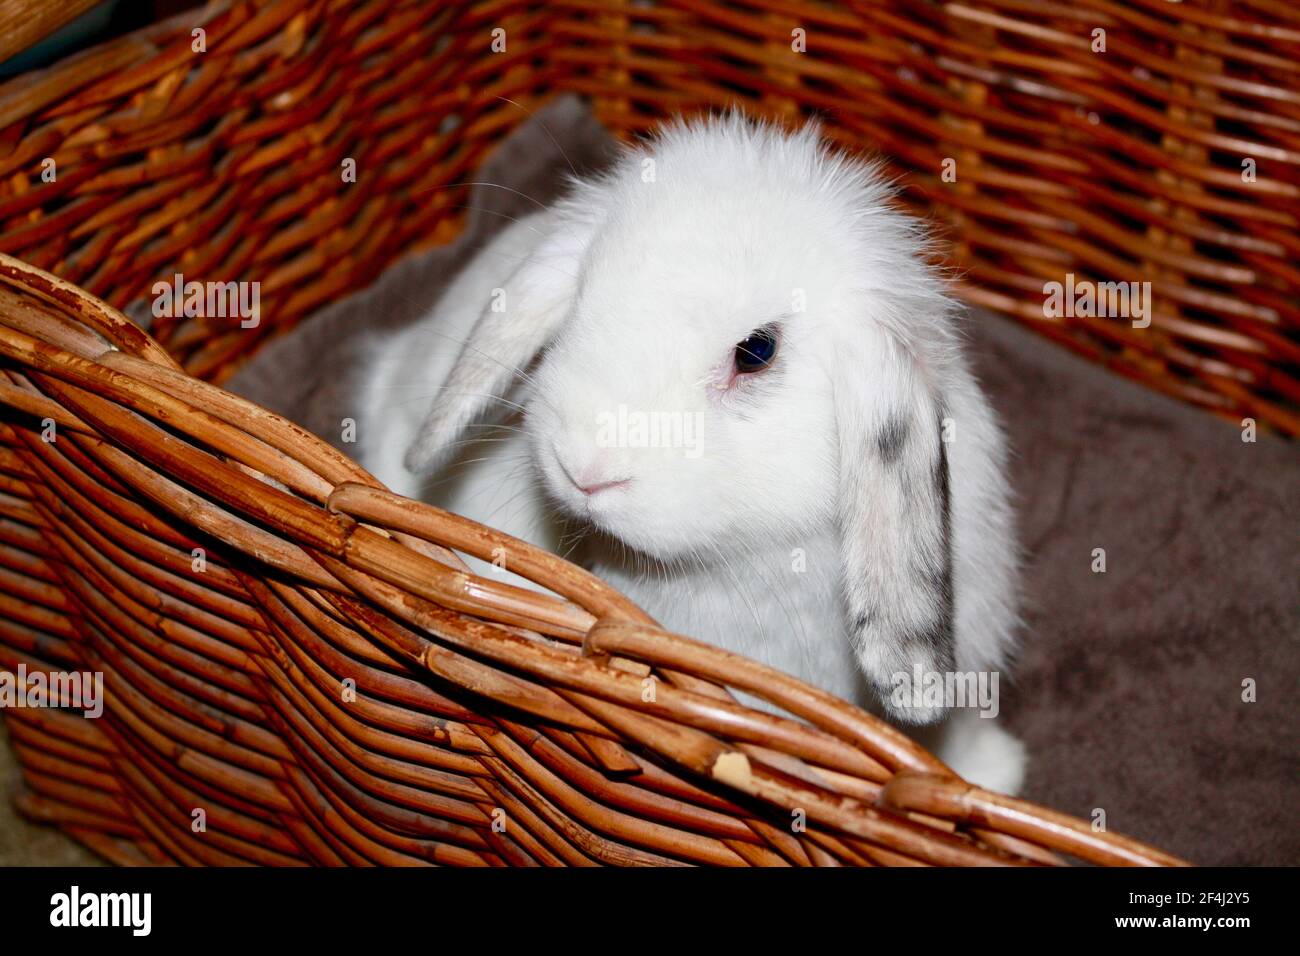 Baby Female Harlequin and White Holland Lop Bunny Rabbit Sitting in Wicker Basket Oryctolagus cuniculus Stock Photo